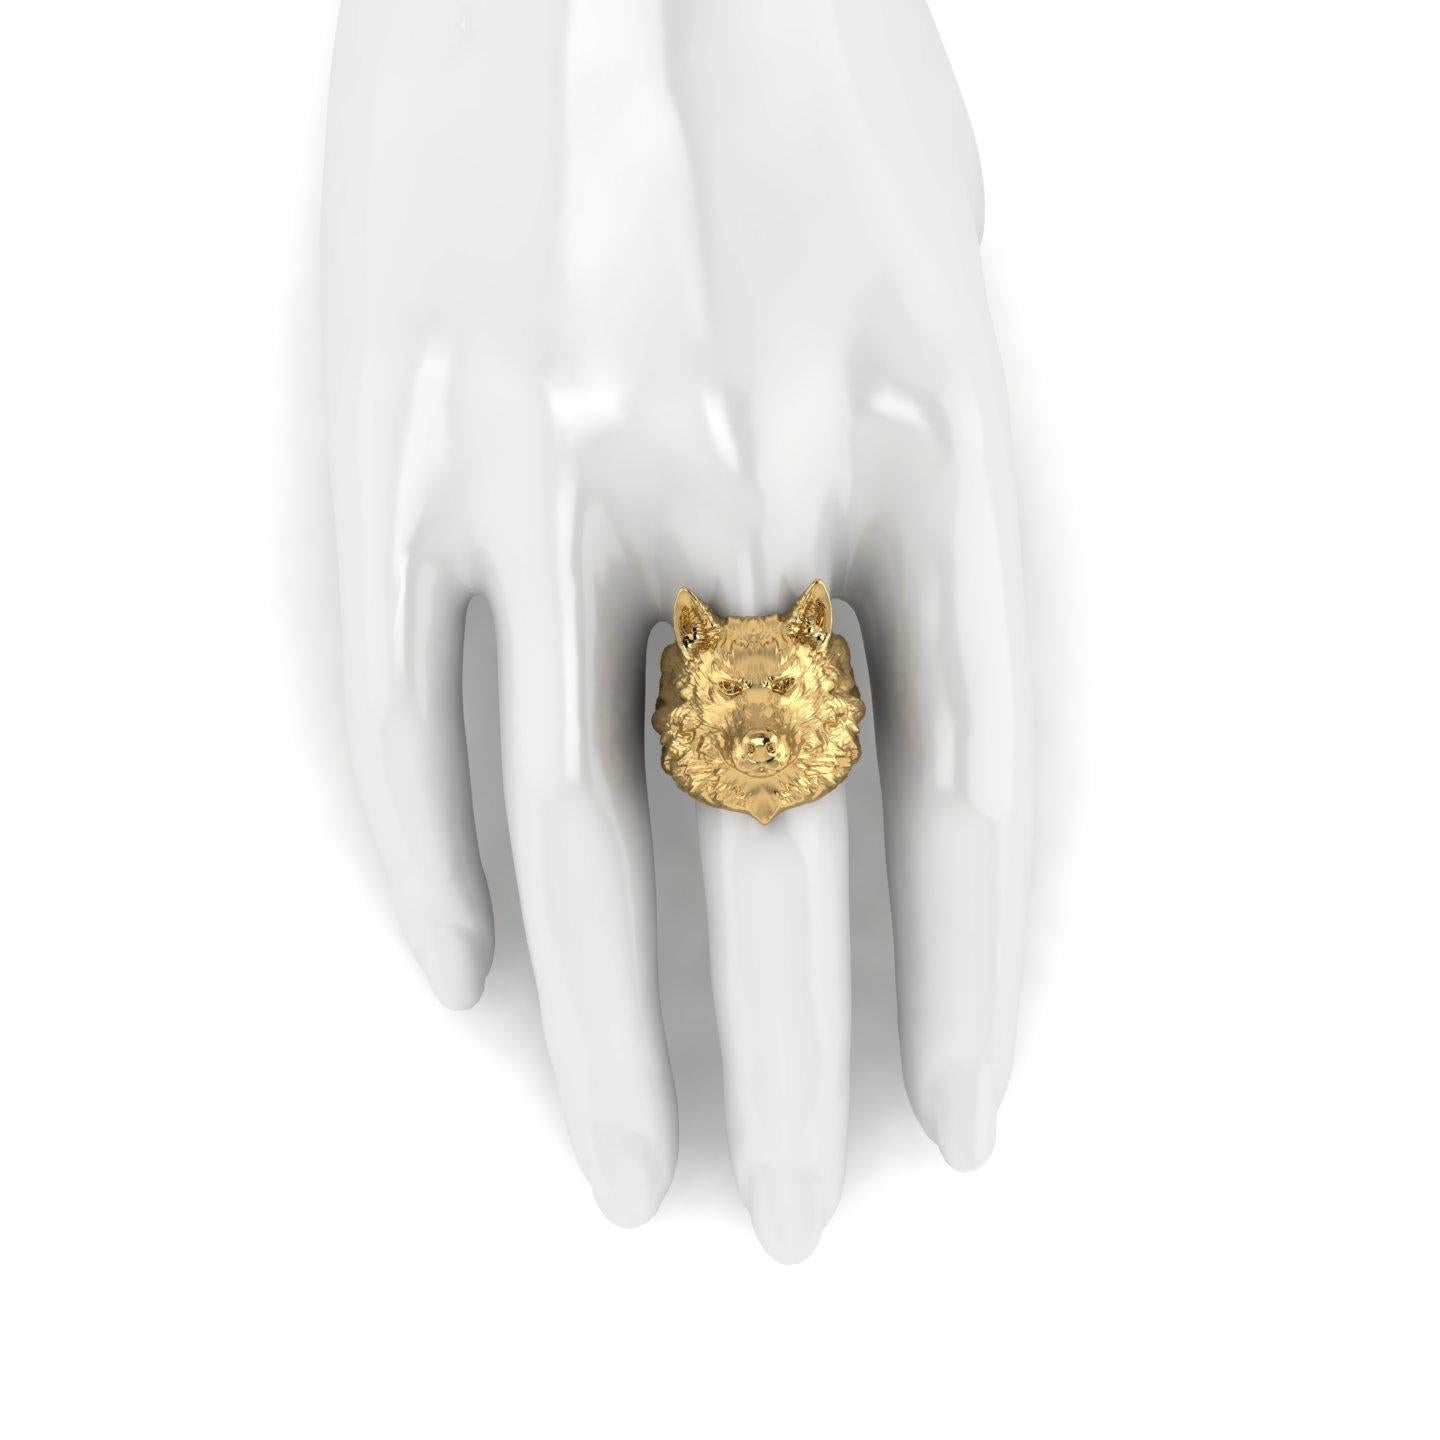 18k Solid Yellow Gold Wolf Ring entirely made in 18k Solid Yellow Gold, no platings,  detailed, made to order of your size each time, due to the finger size fitting importance.
This is a solid piece of 18k Yellow Gold, with its weight, for people